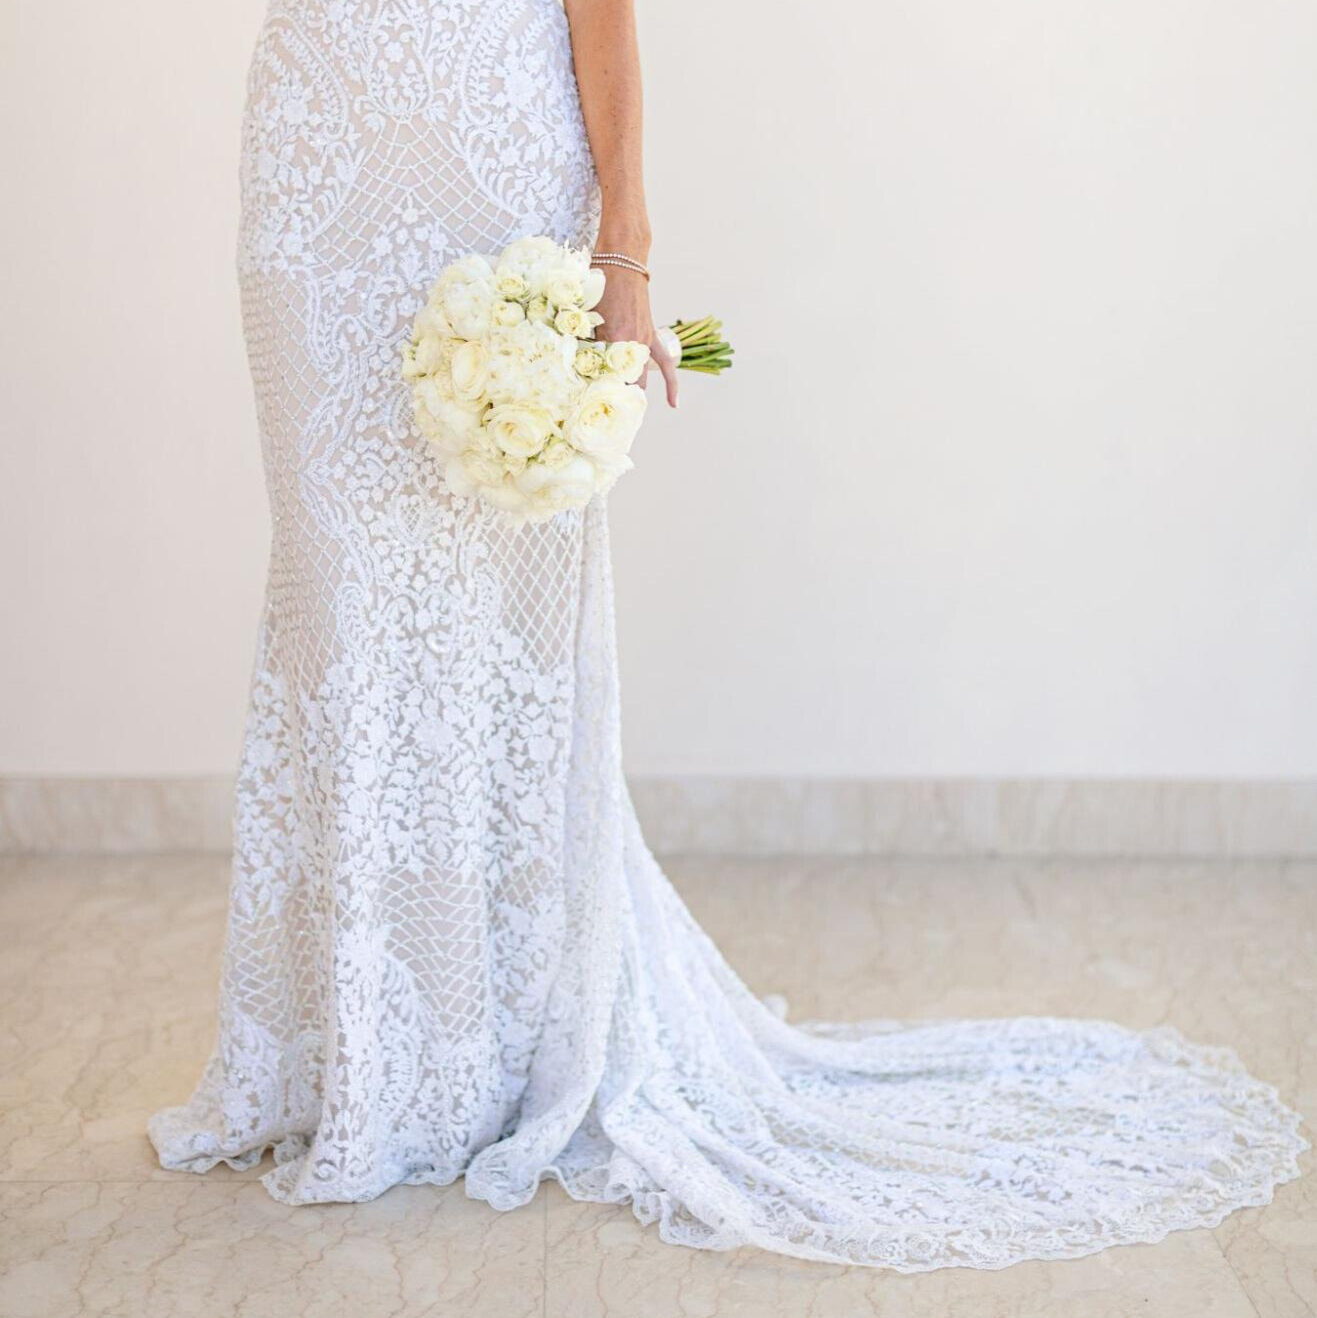 A blonde bride in a fitted lace gown with a train holds a bouquet of white flowers at her side